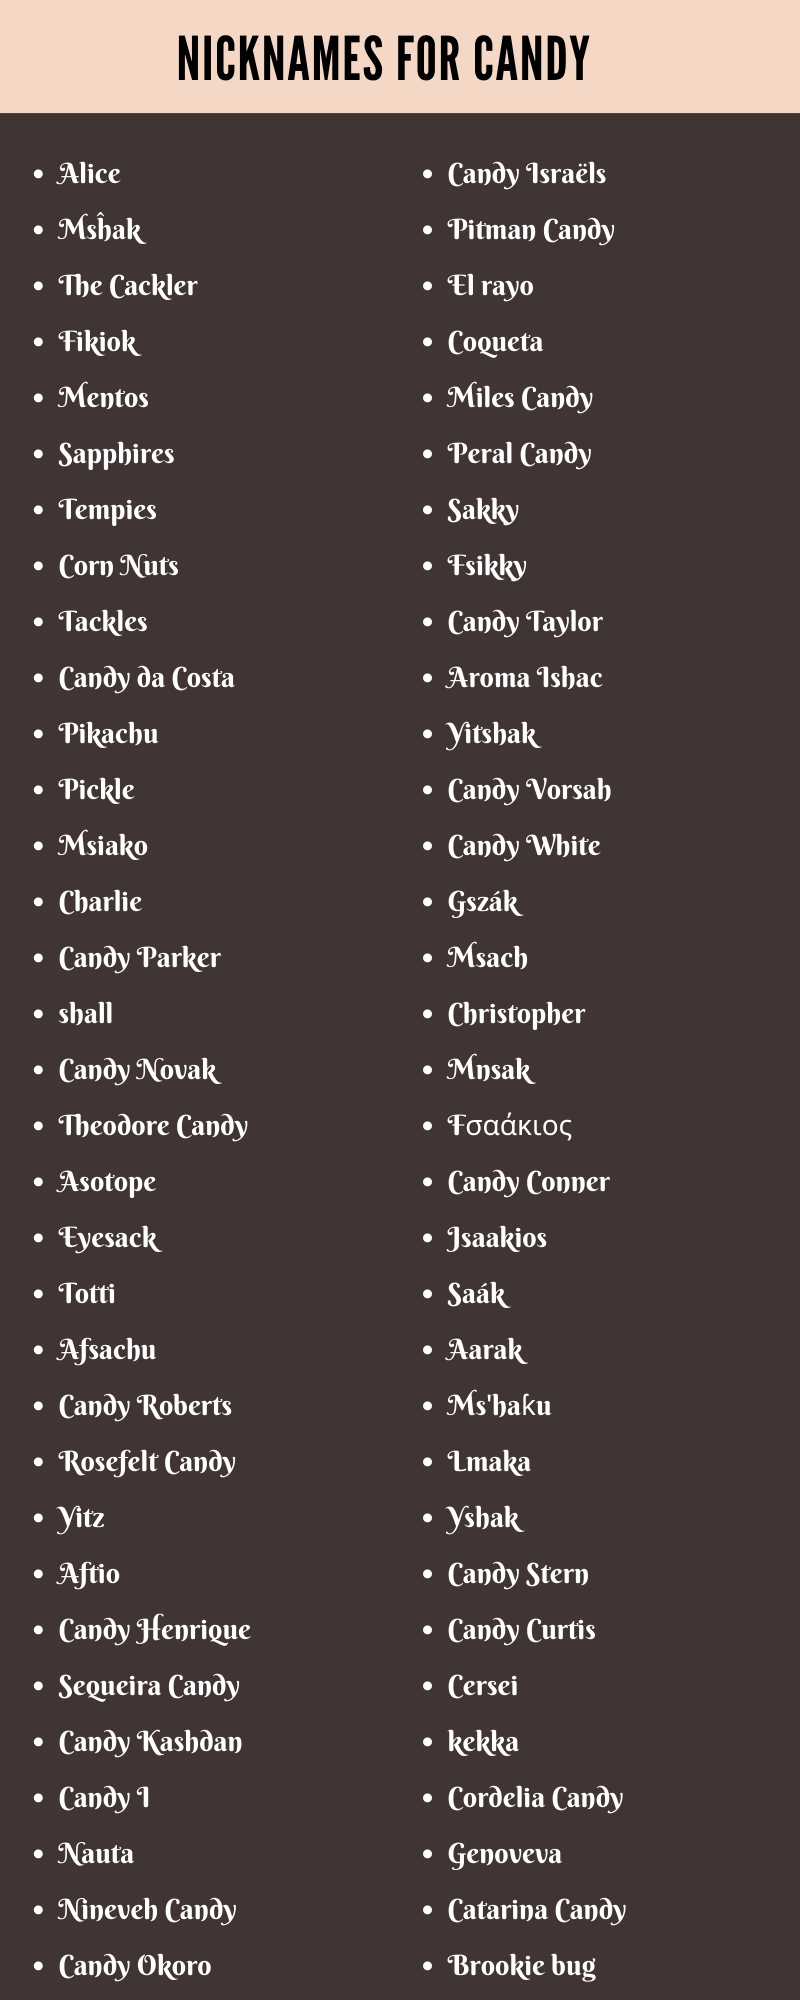 Nicknames For Candy